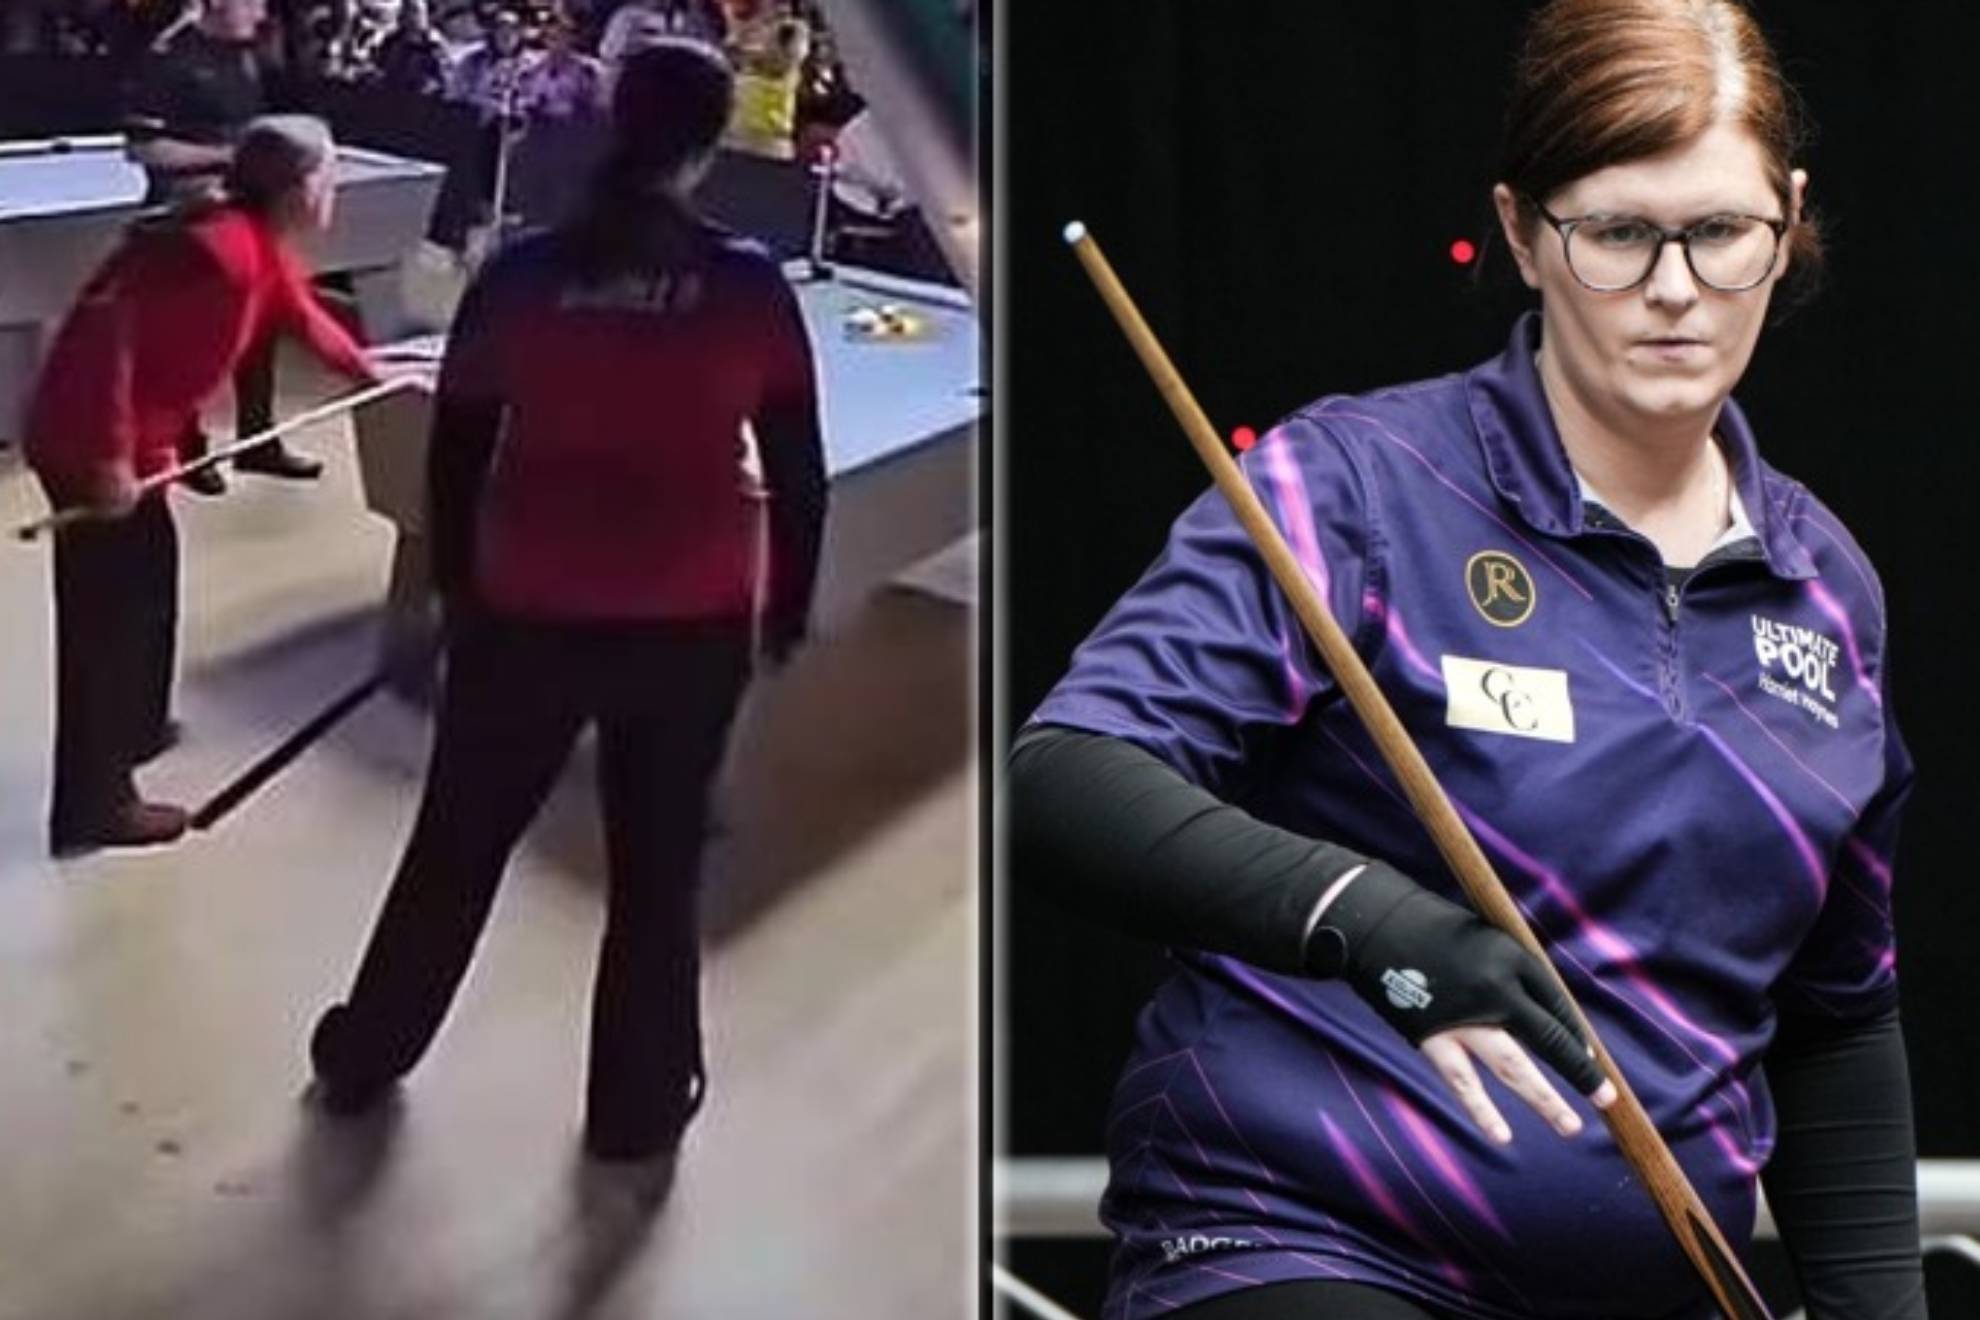 Snooker player refuses to compete against transgender rival and quits final of a lifetime